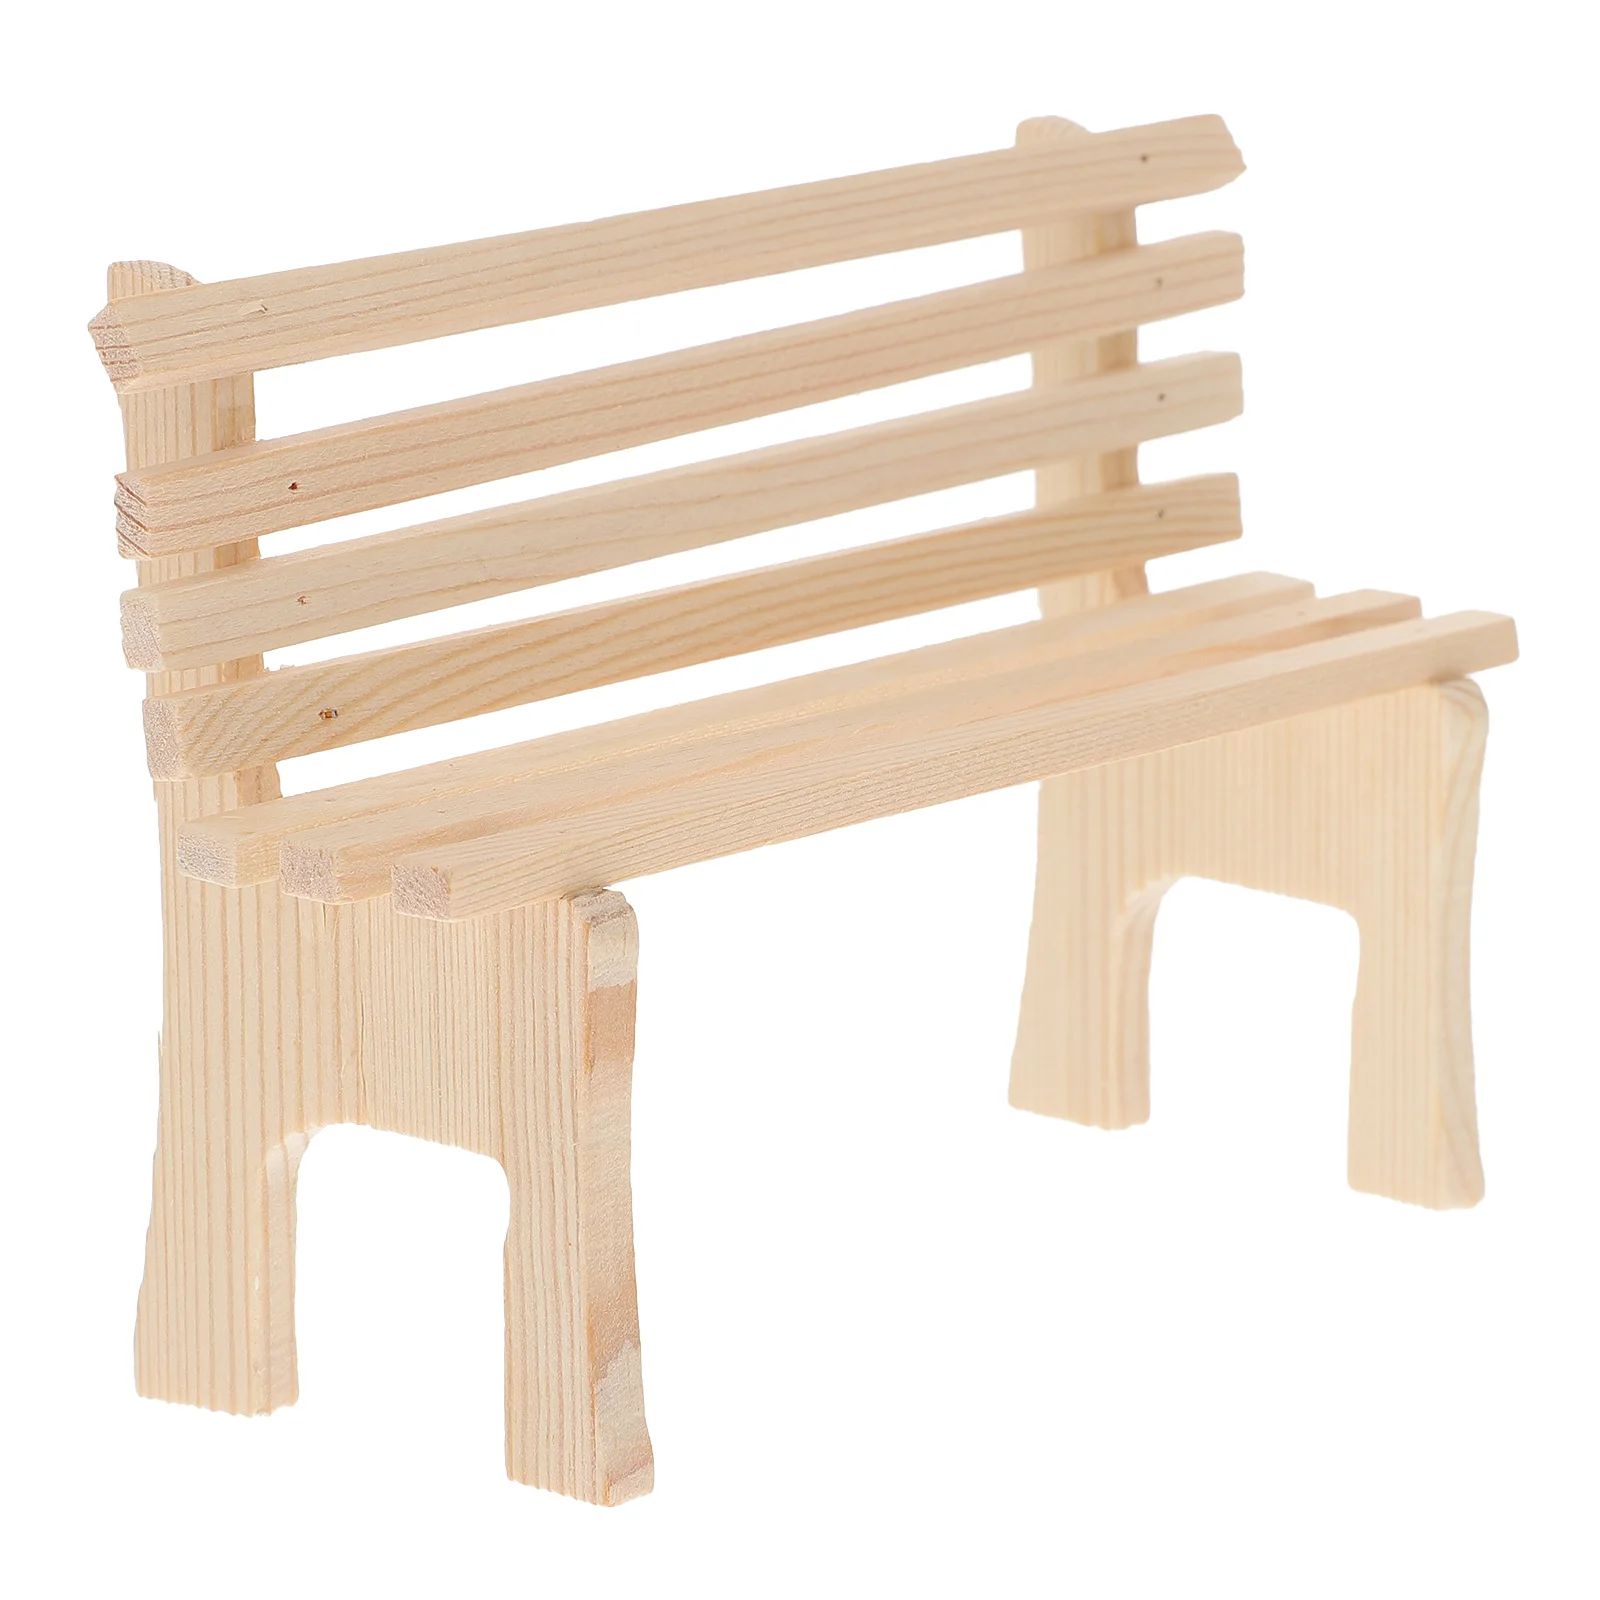 

Mini Bench Miniature Model Wooden Garden Fairy Dollhouse Furniture Accessory Benches Outdoor